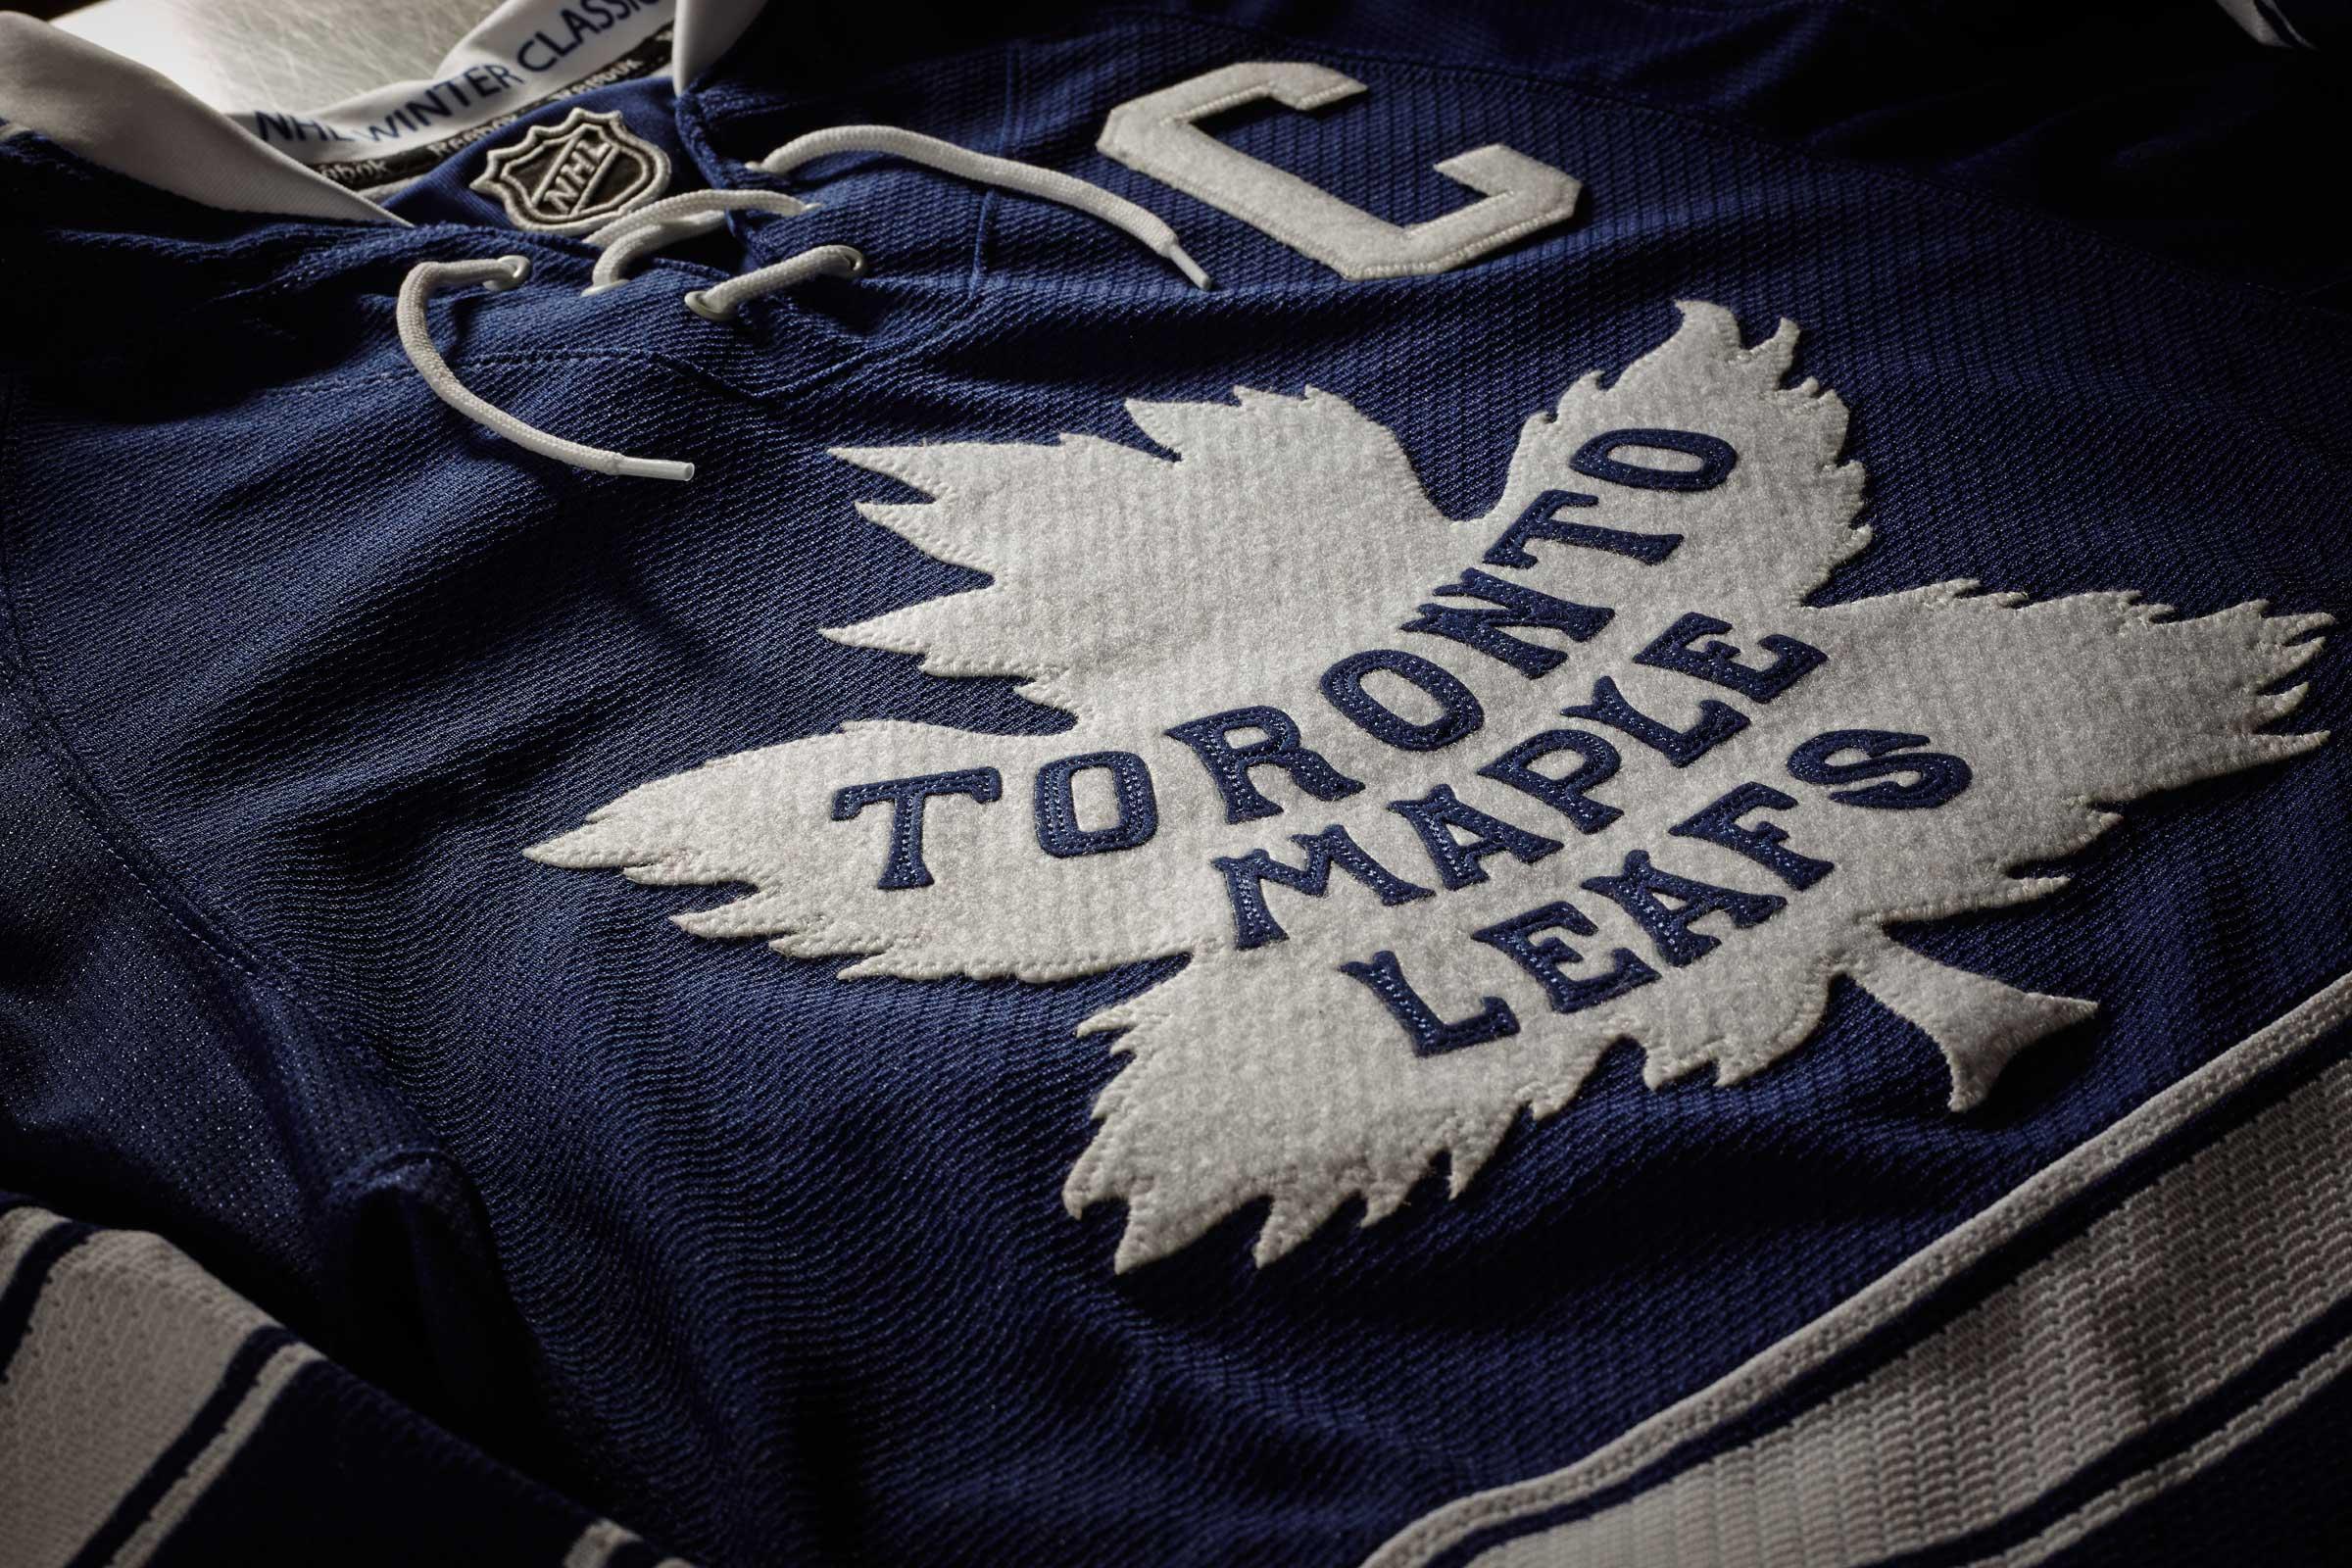 2021 Toronto Maple Leafs Wallpapers - Wallpaper Cave